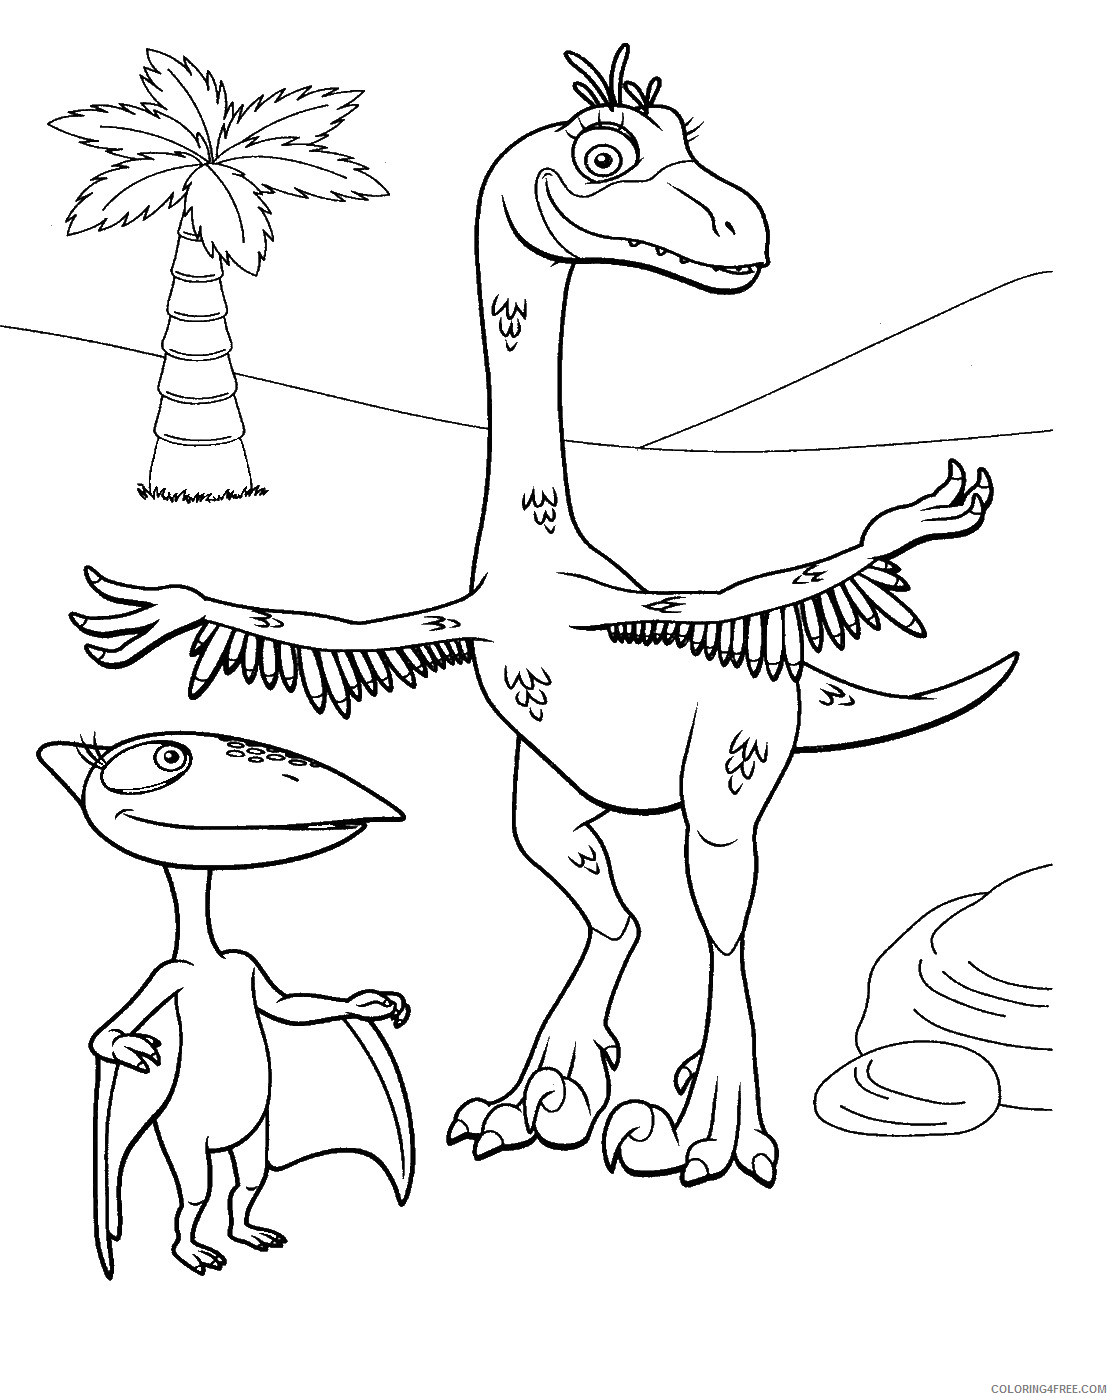 Dinosaur Train Coloring Pages Cartoons dino_train_cl_22 Printable 2020 2243 Coloring4free